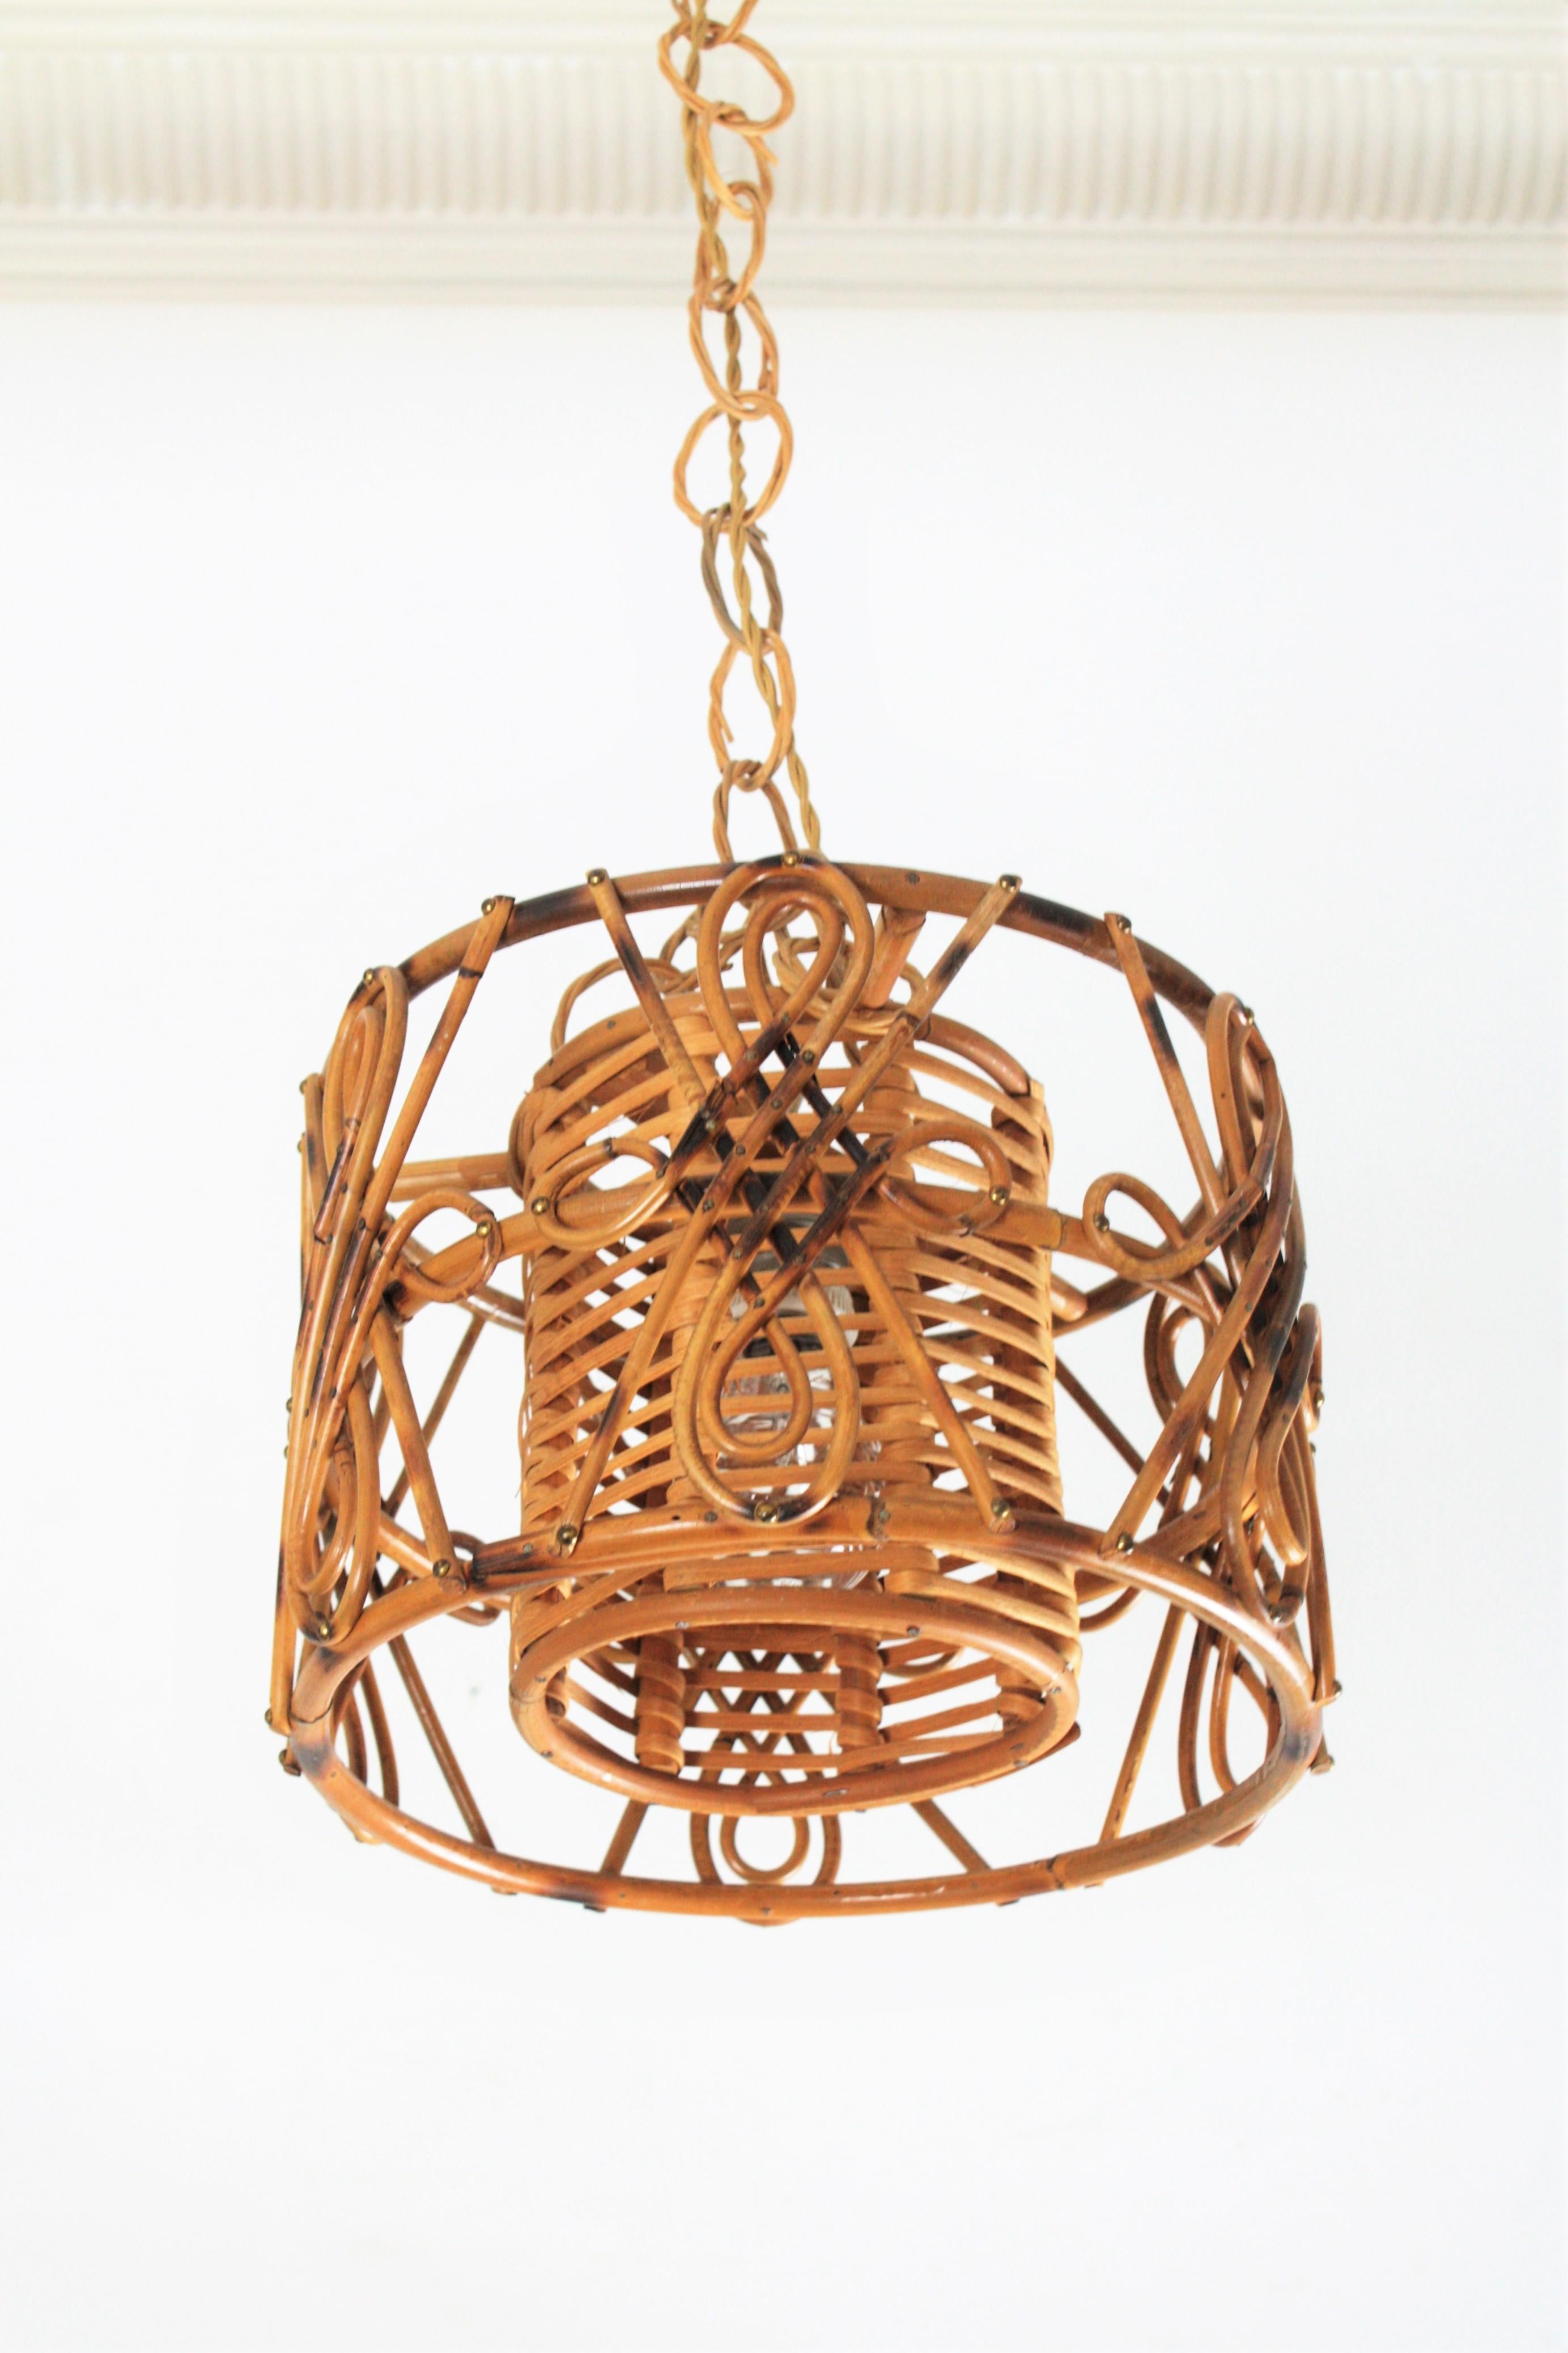 Handcrafted bamboo and rattan drum shaped chandelier with interior woven wicker / rattan shade. 
Manufactured at the Mid-Century Modern period with chinoiserie accents. France, 1950s.
The chain can be shortened to adjusted it to the desired height.